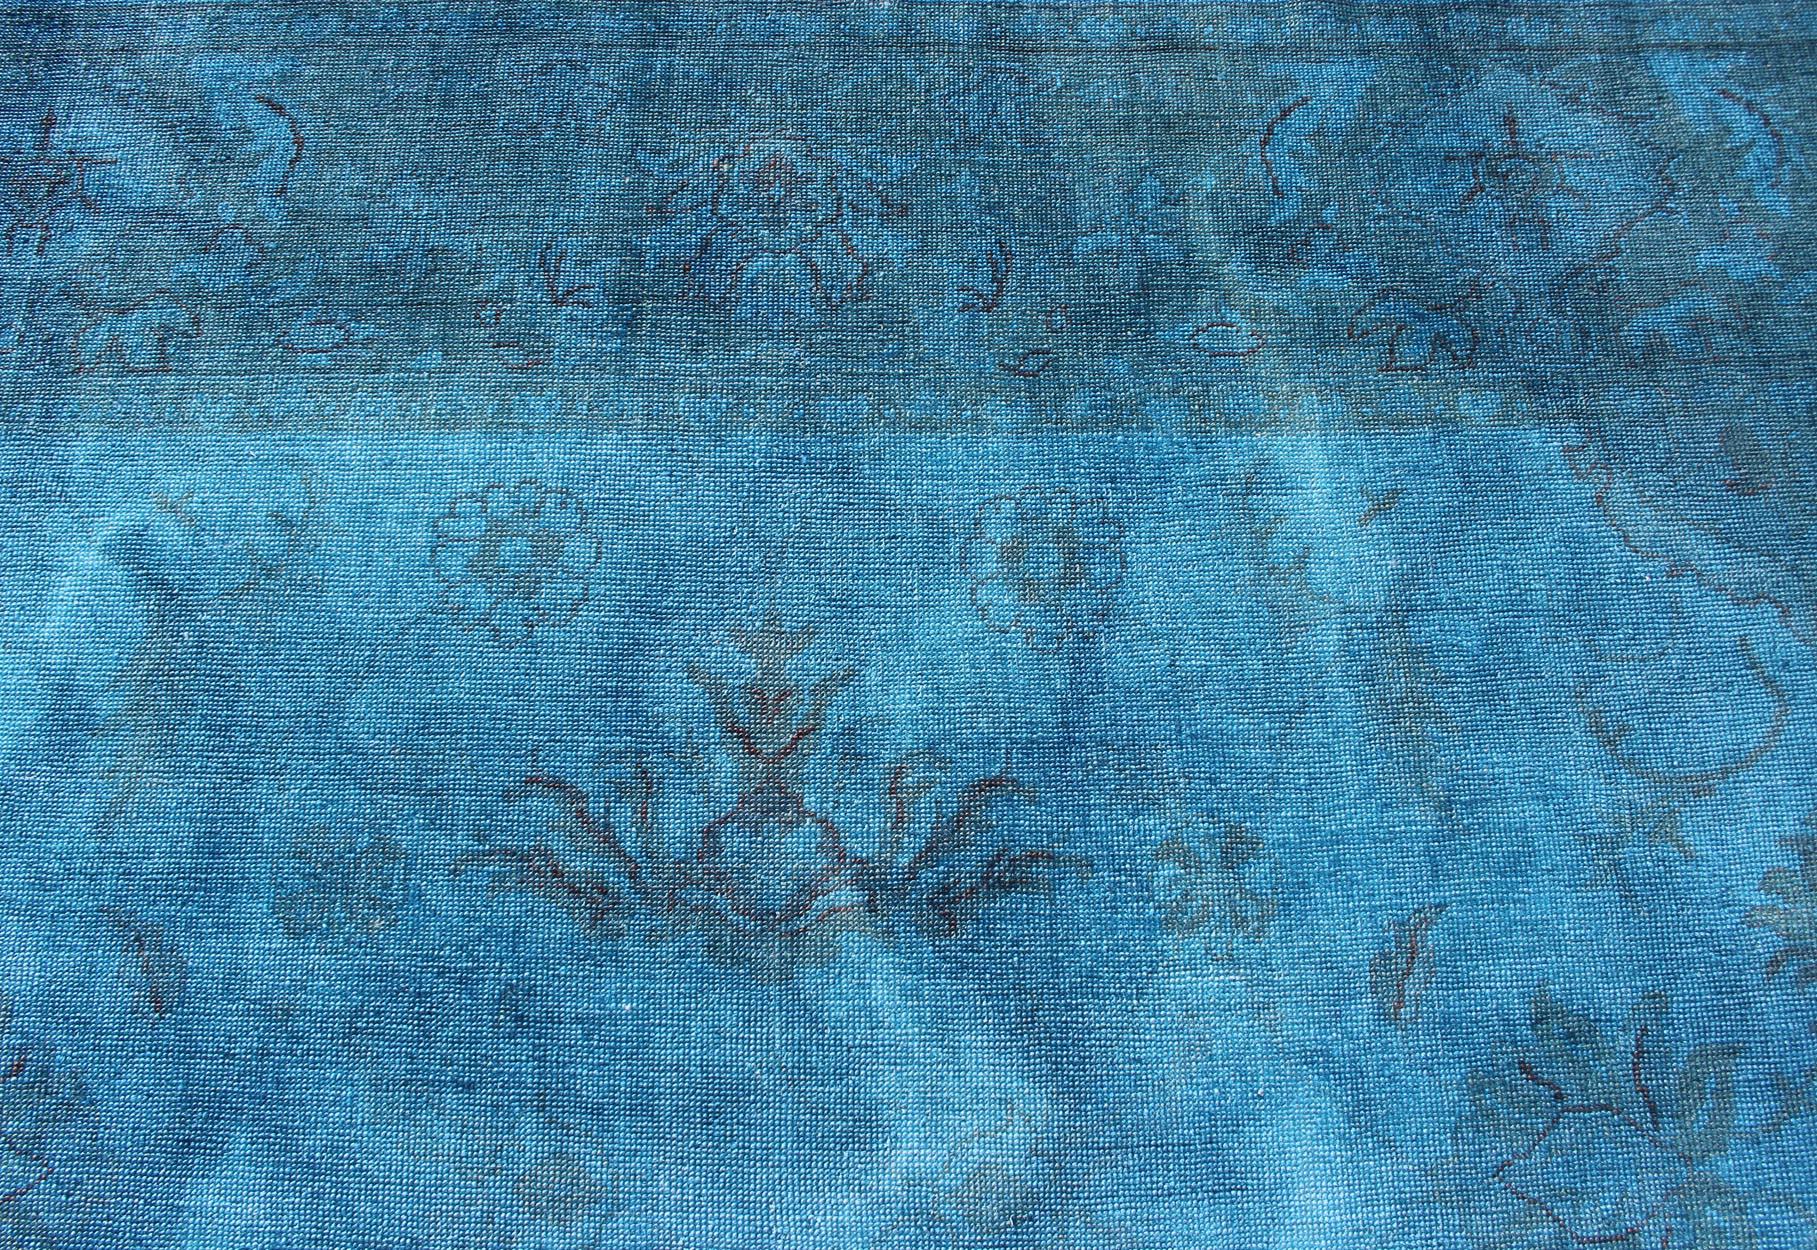 Large Modern Oushak Turkish Rug Over-Dyed in Blue Shades For Sale 2